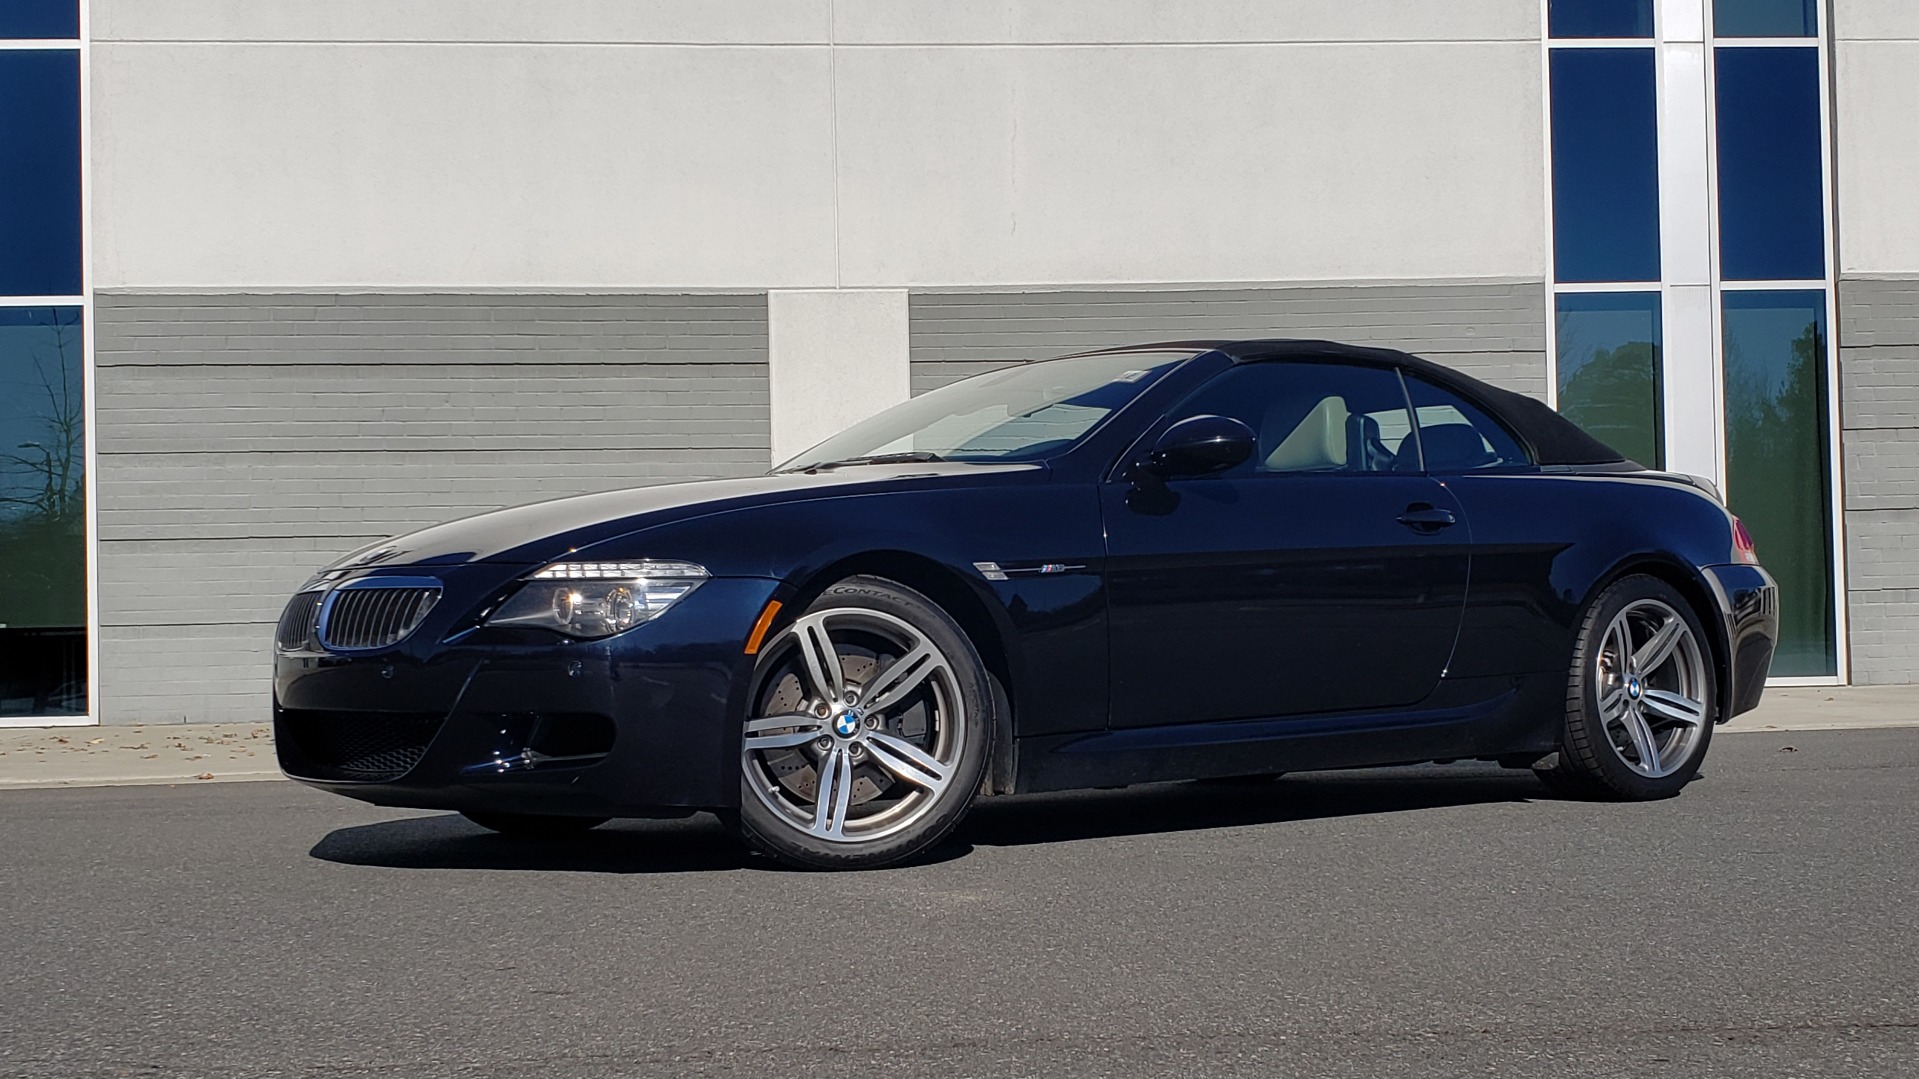 Used 2009 BMW M6 CONVERTIBLE / 5.0L V10 (500HP) / PREM SND / HUD / 19IN WHEELS for sale Sold at Formula Imports in Charlotte NC 28227 7